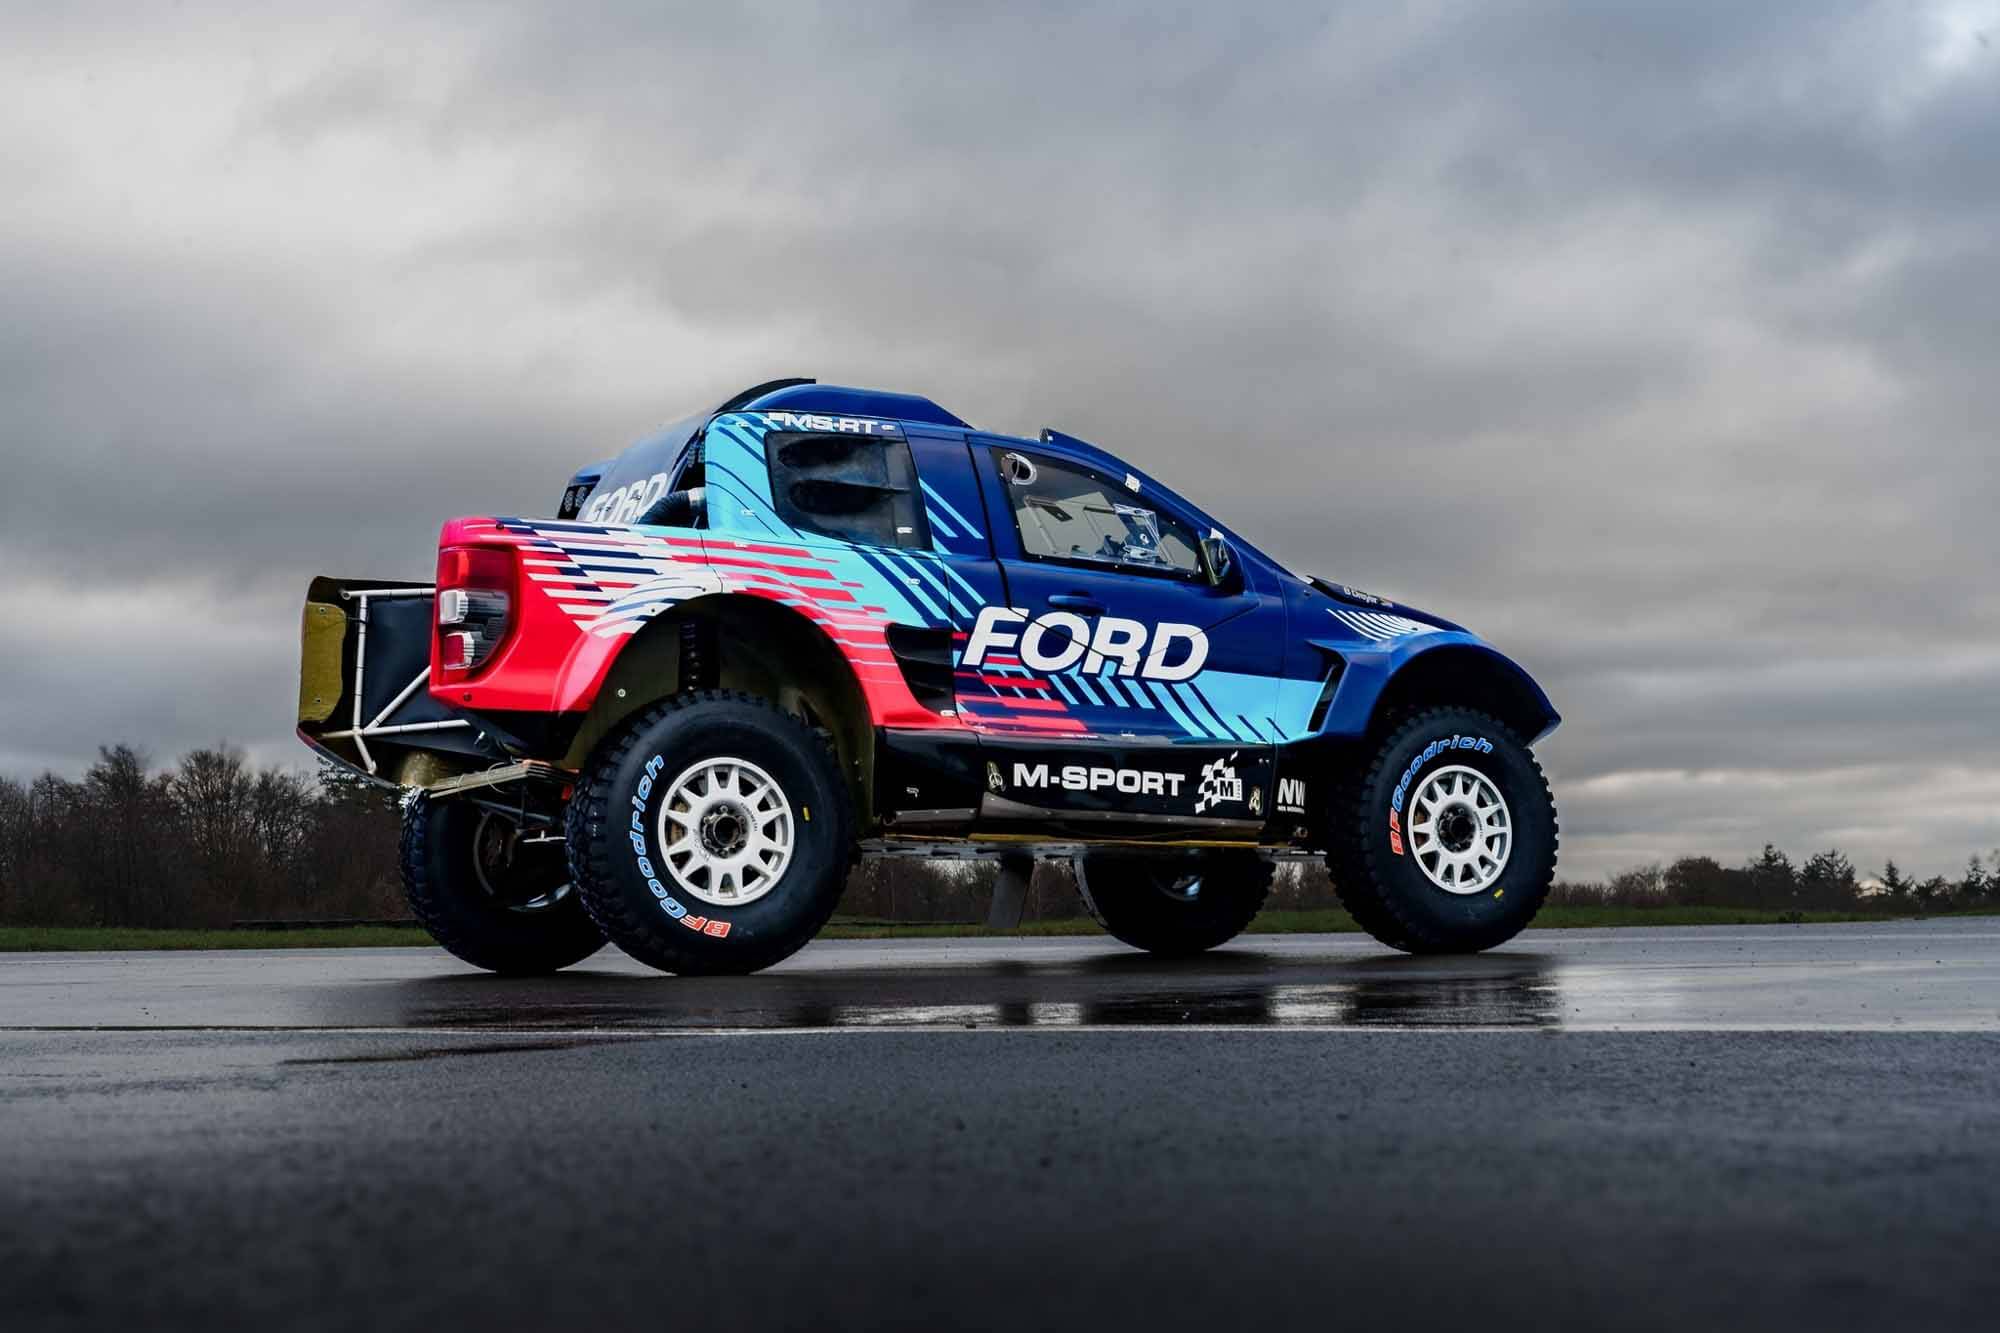 Ford showed off-road racing pickup truck Ranger for the Dakar rally